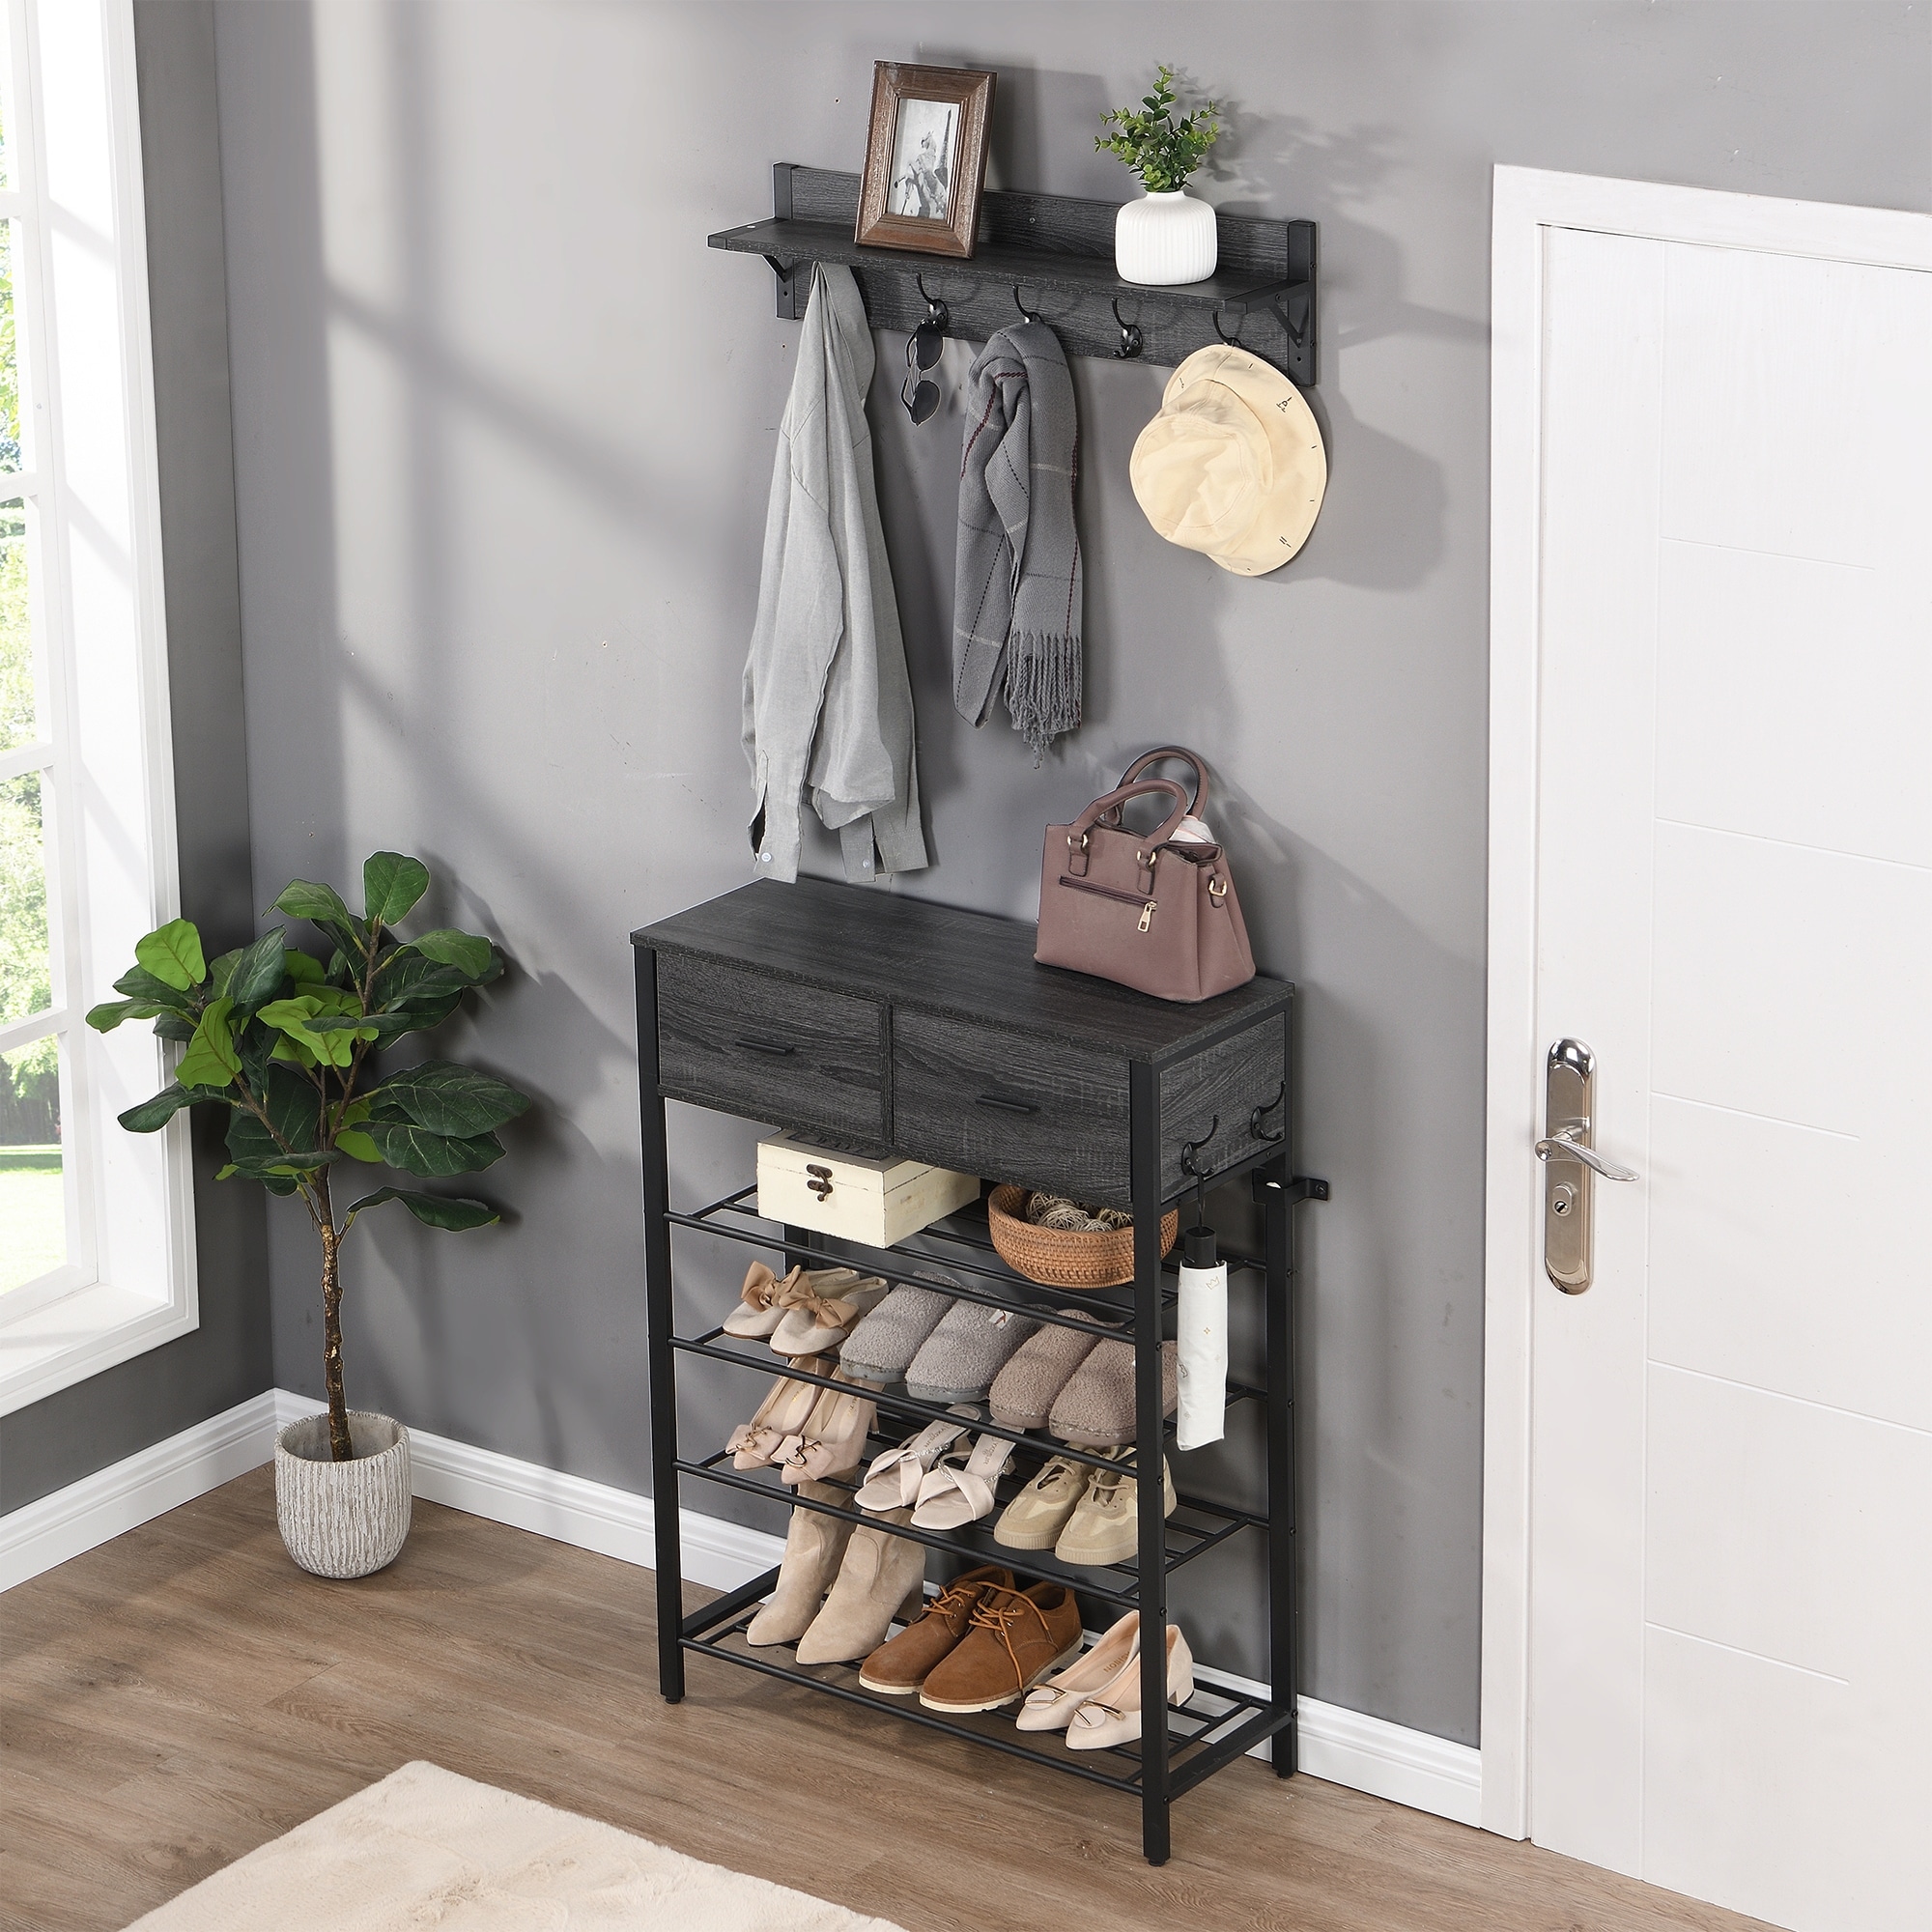 https://ak1.ostkcdn.com/images/products/is/images/direct/aa810a13c9bf38599253cc019a2f4e9d9a5b2921/4-tier-Shoe-Shelf%2C-Entryway-Storage-Organizer-with-Drawers-Coat-Rack.jpg